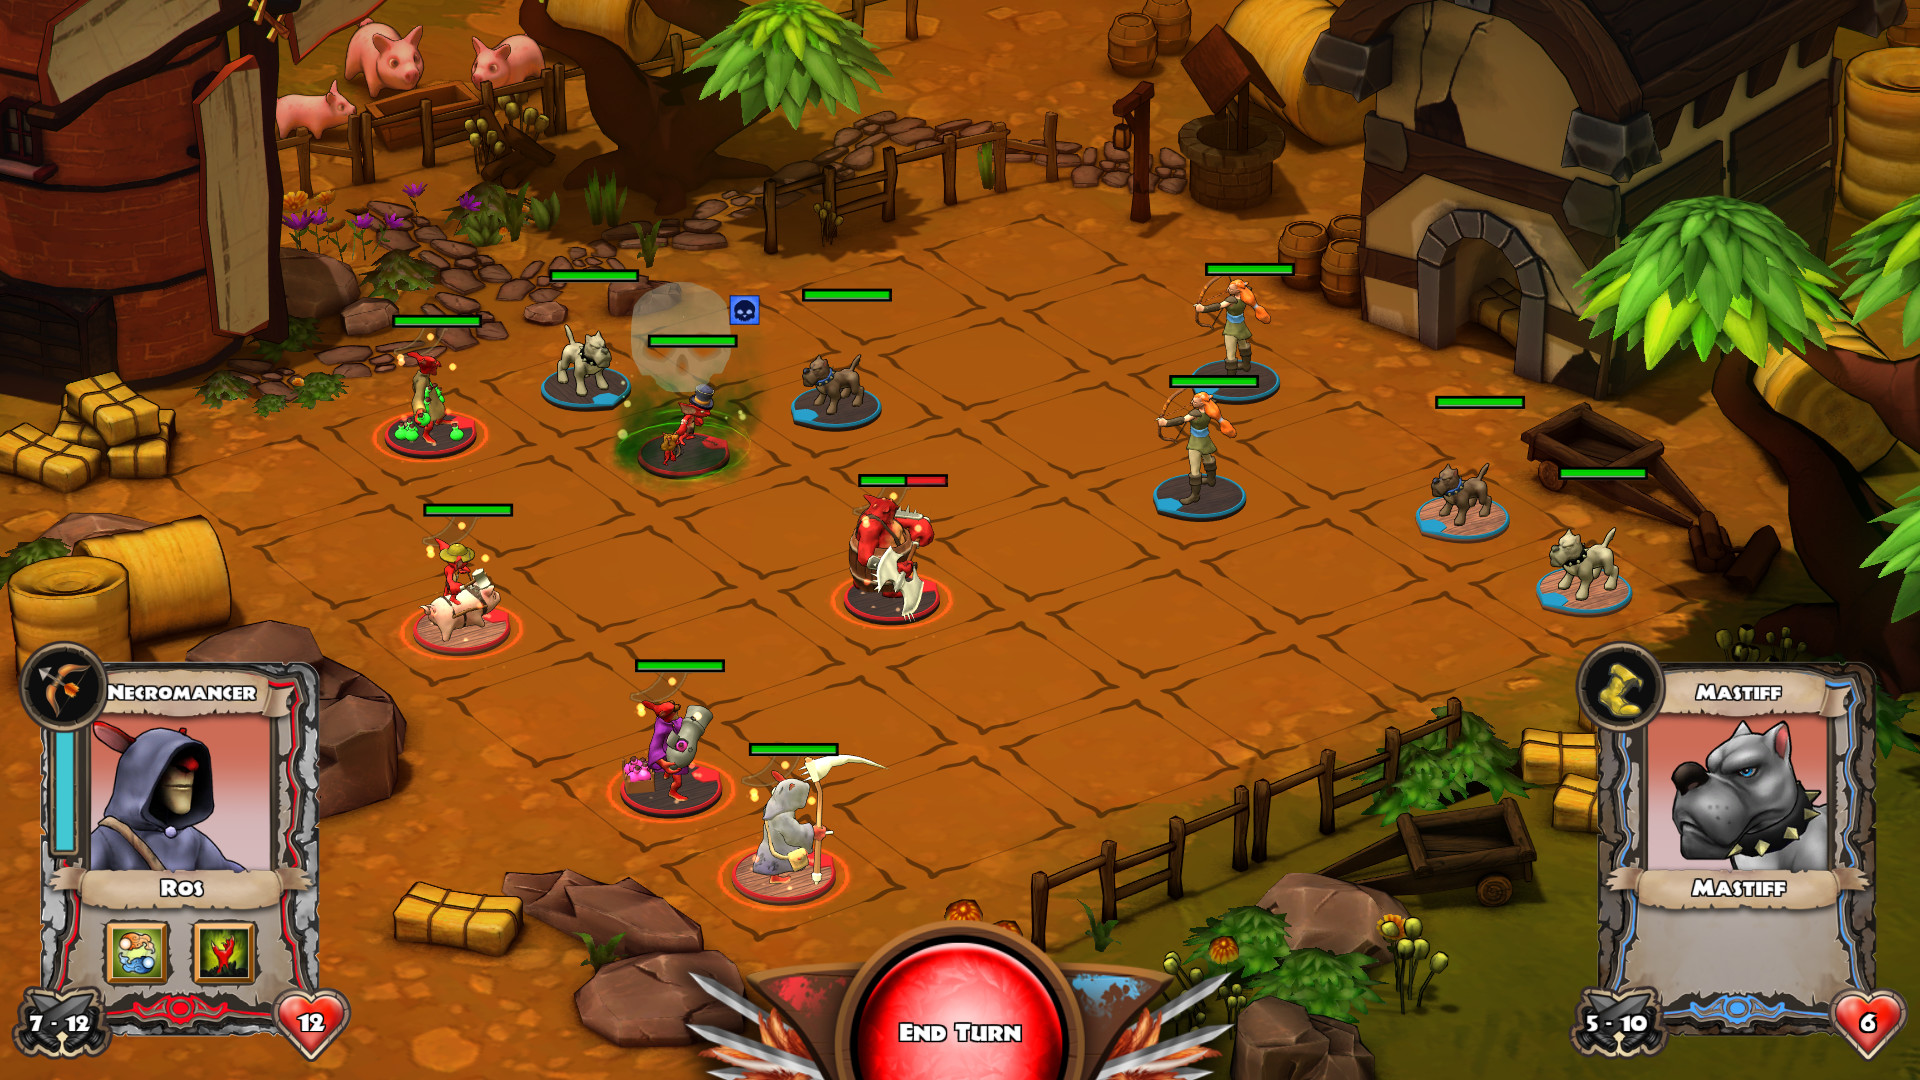 Goblin Squad - Total Division Free Download